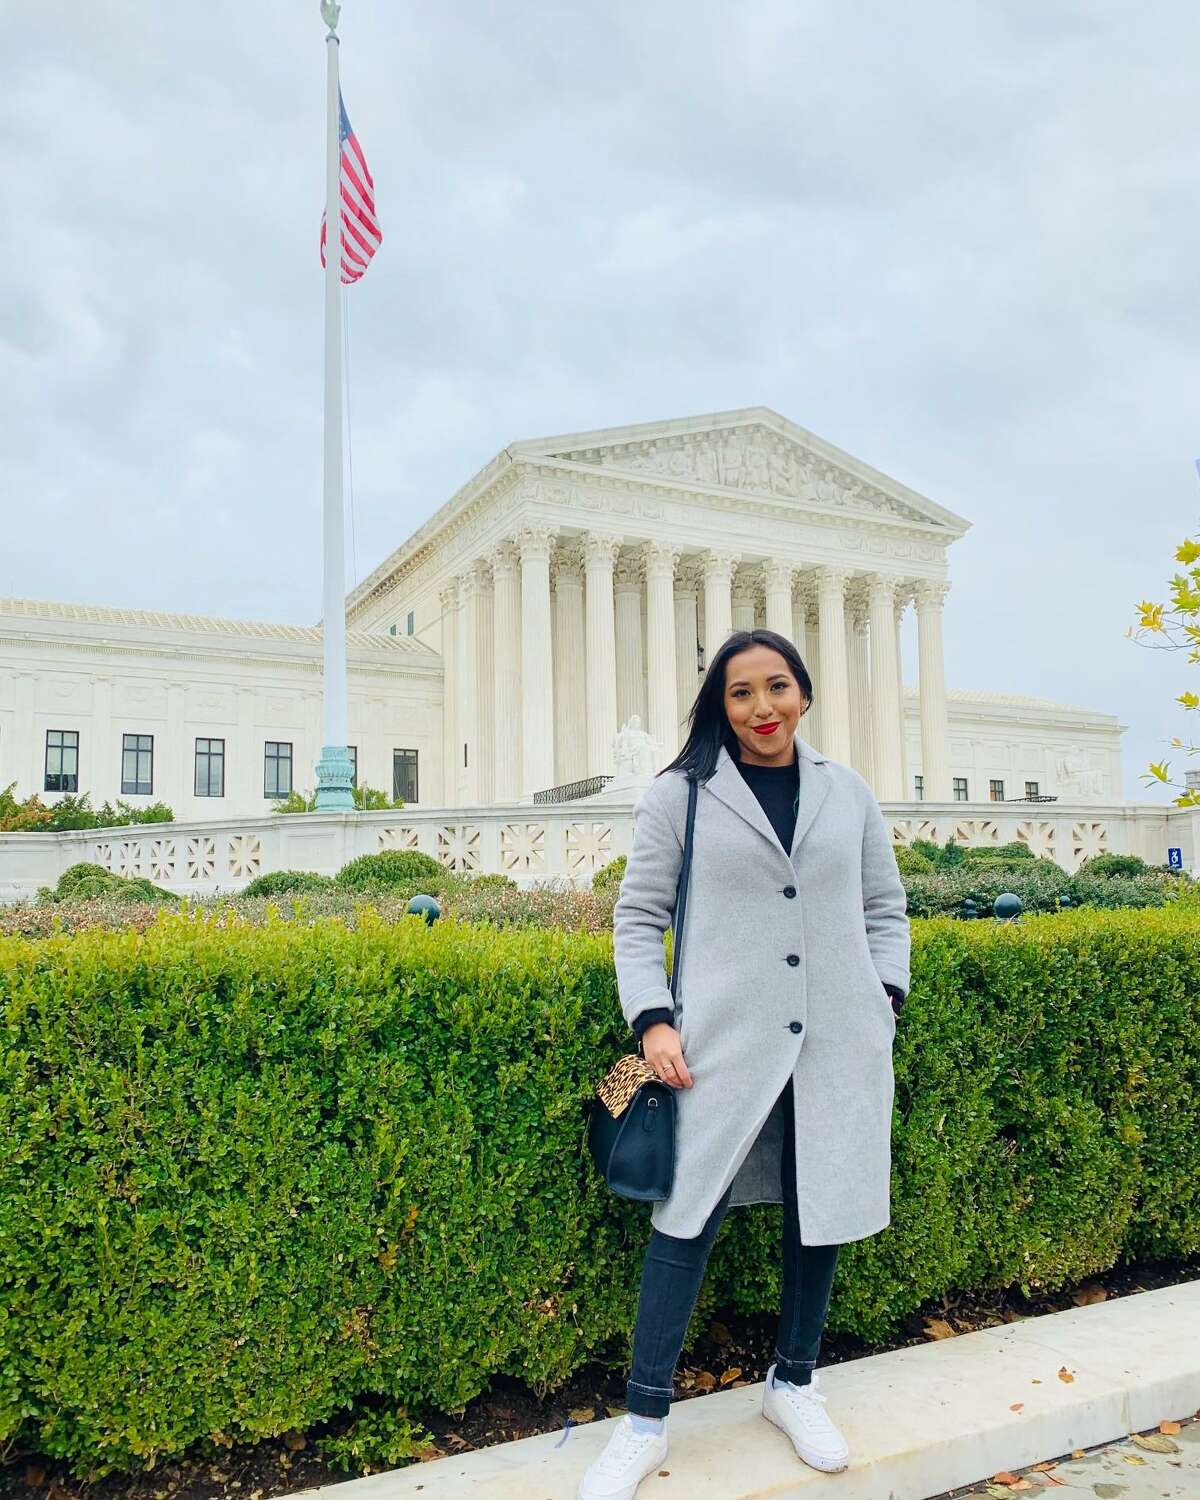 DACA recipient Joseline Tlacomulco stands in front of the Supreme Court in 2019.